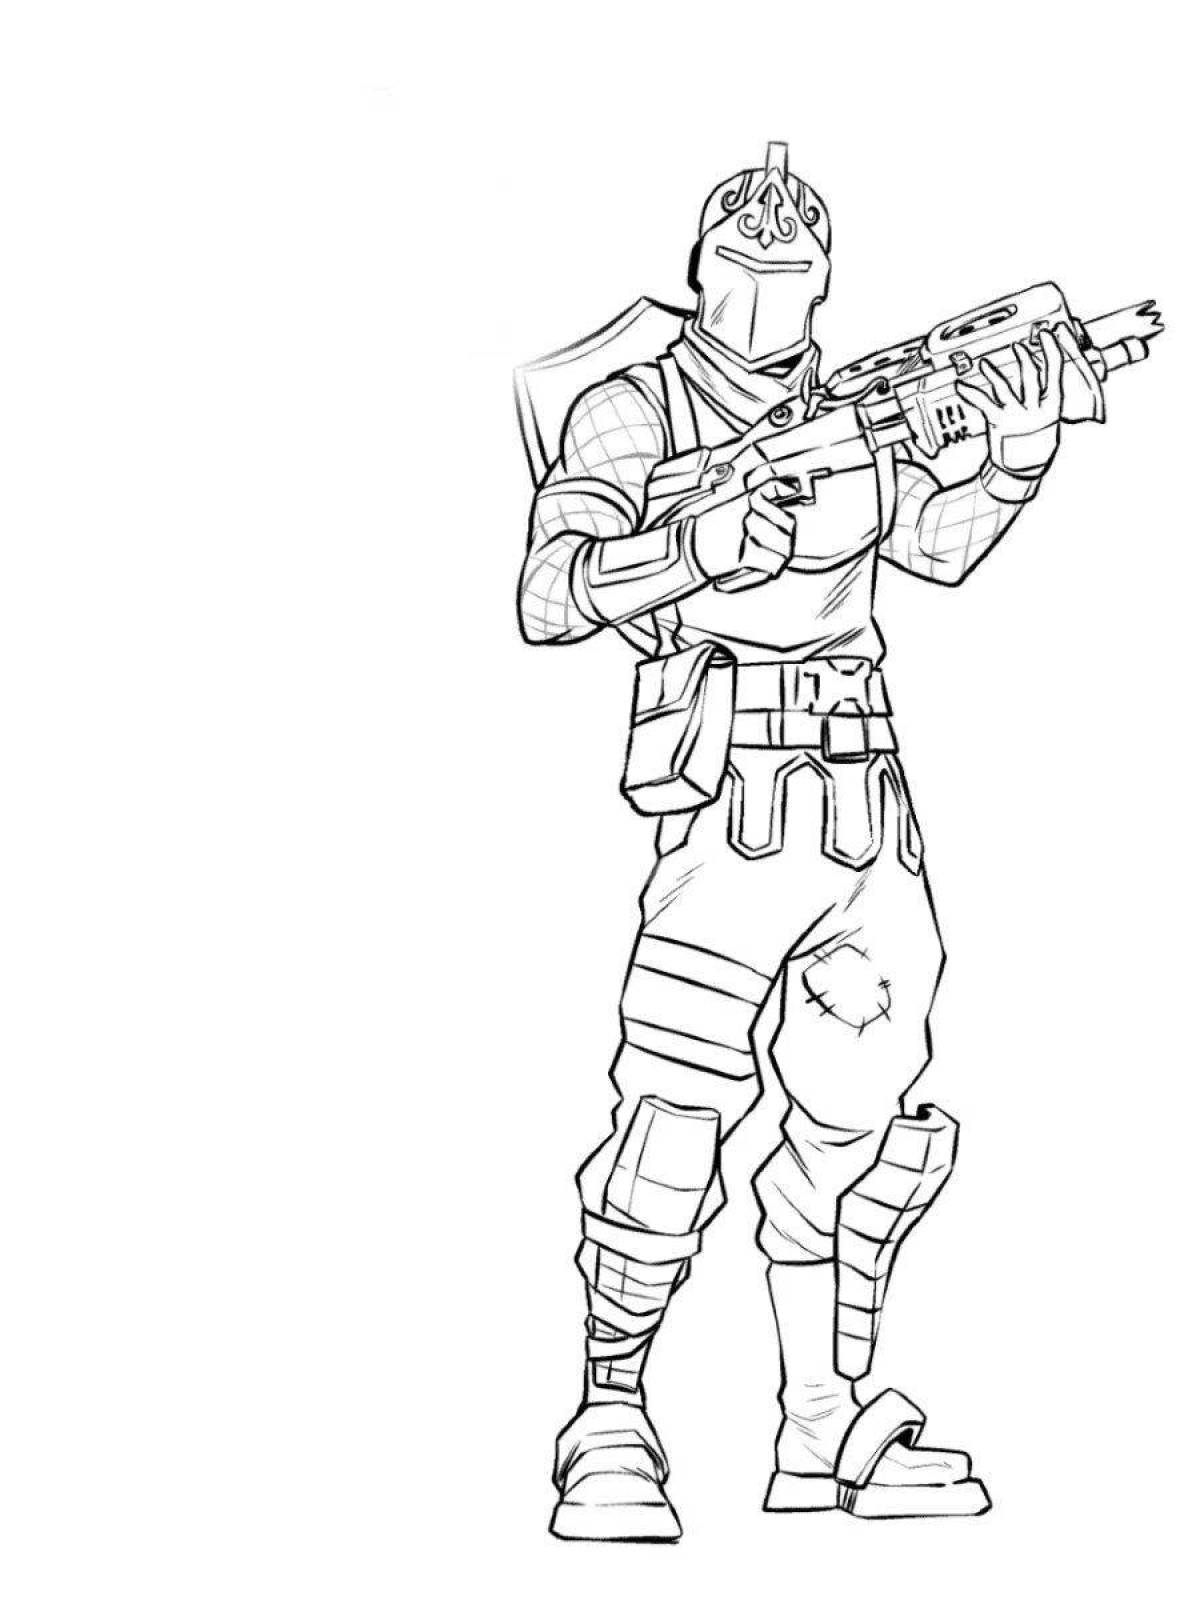 Animated coloring pages of game characters